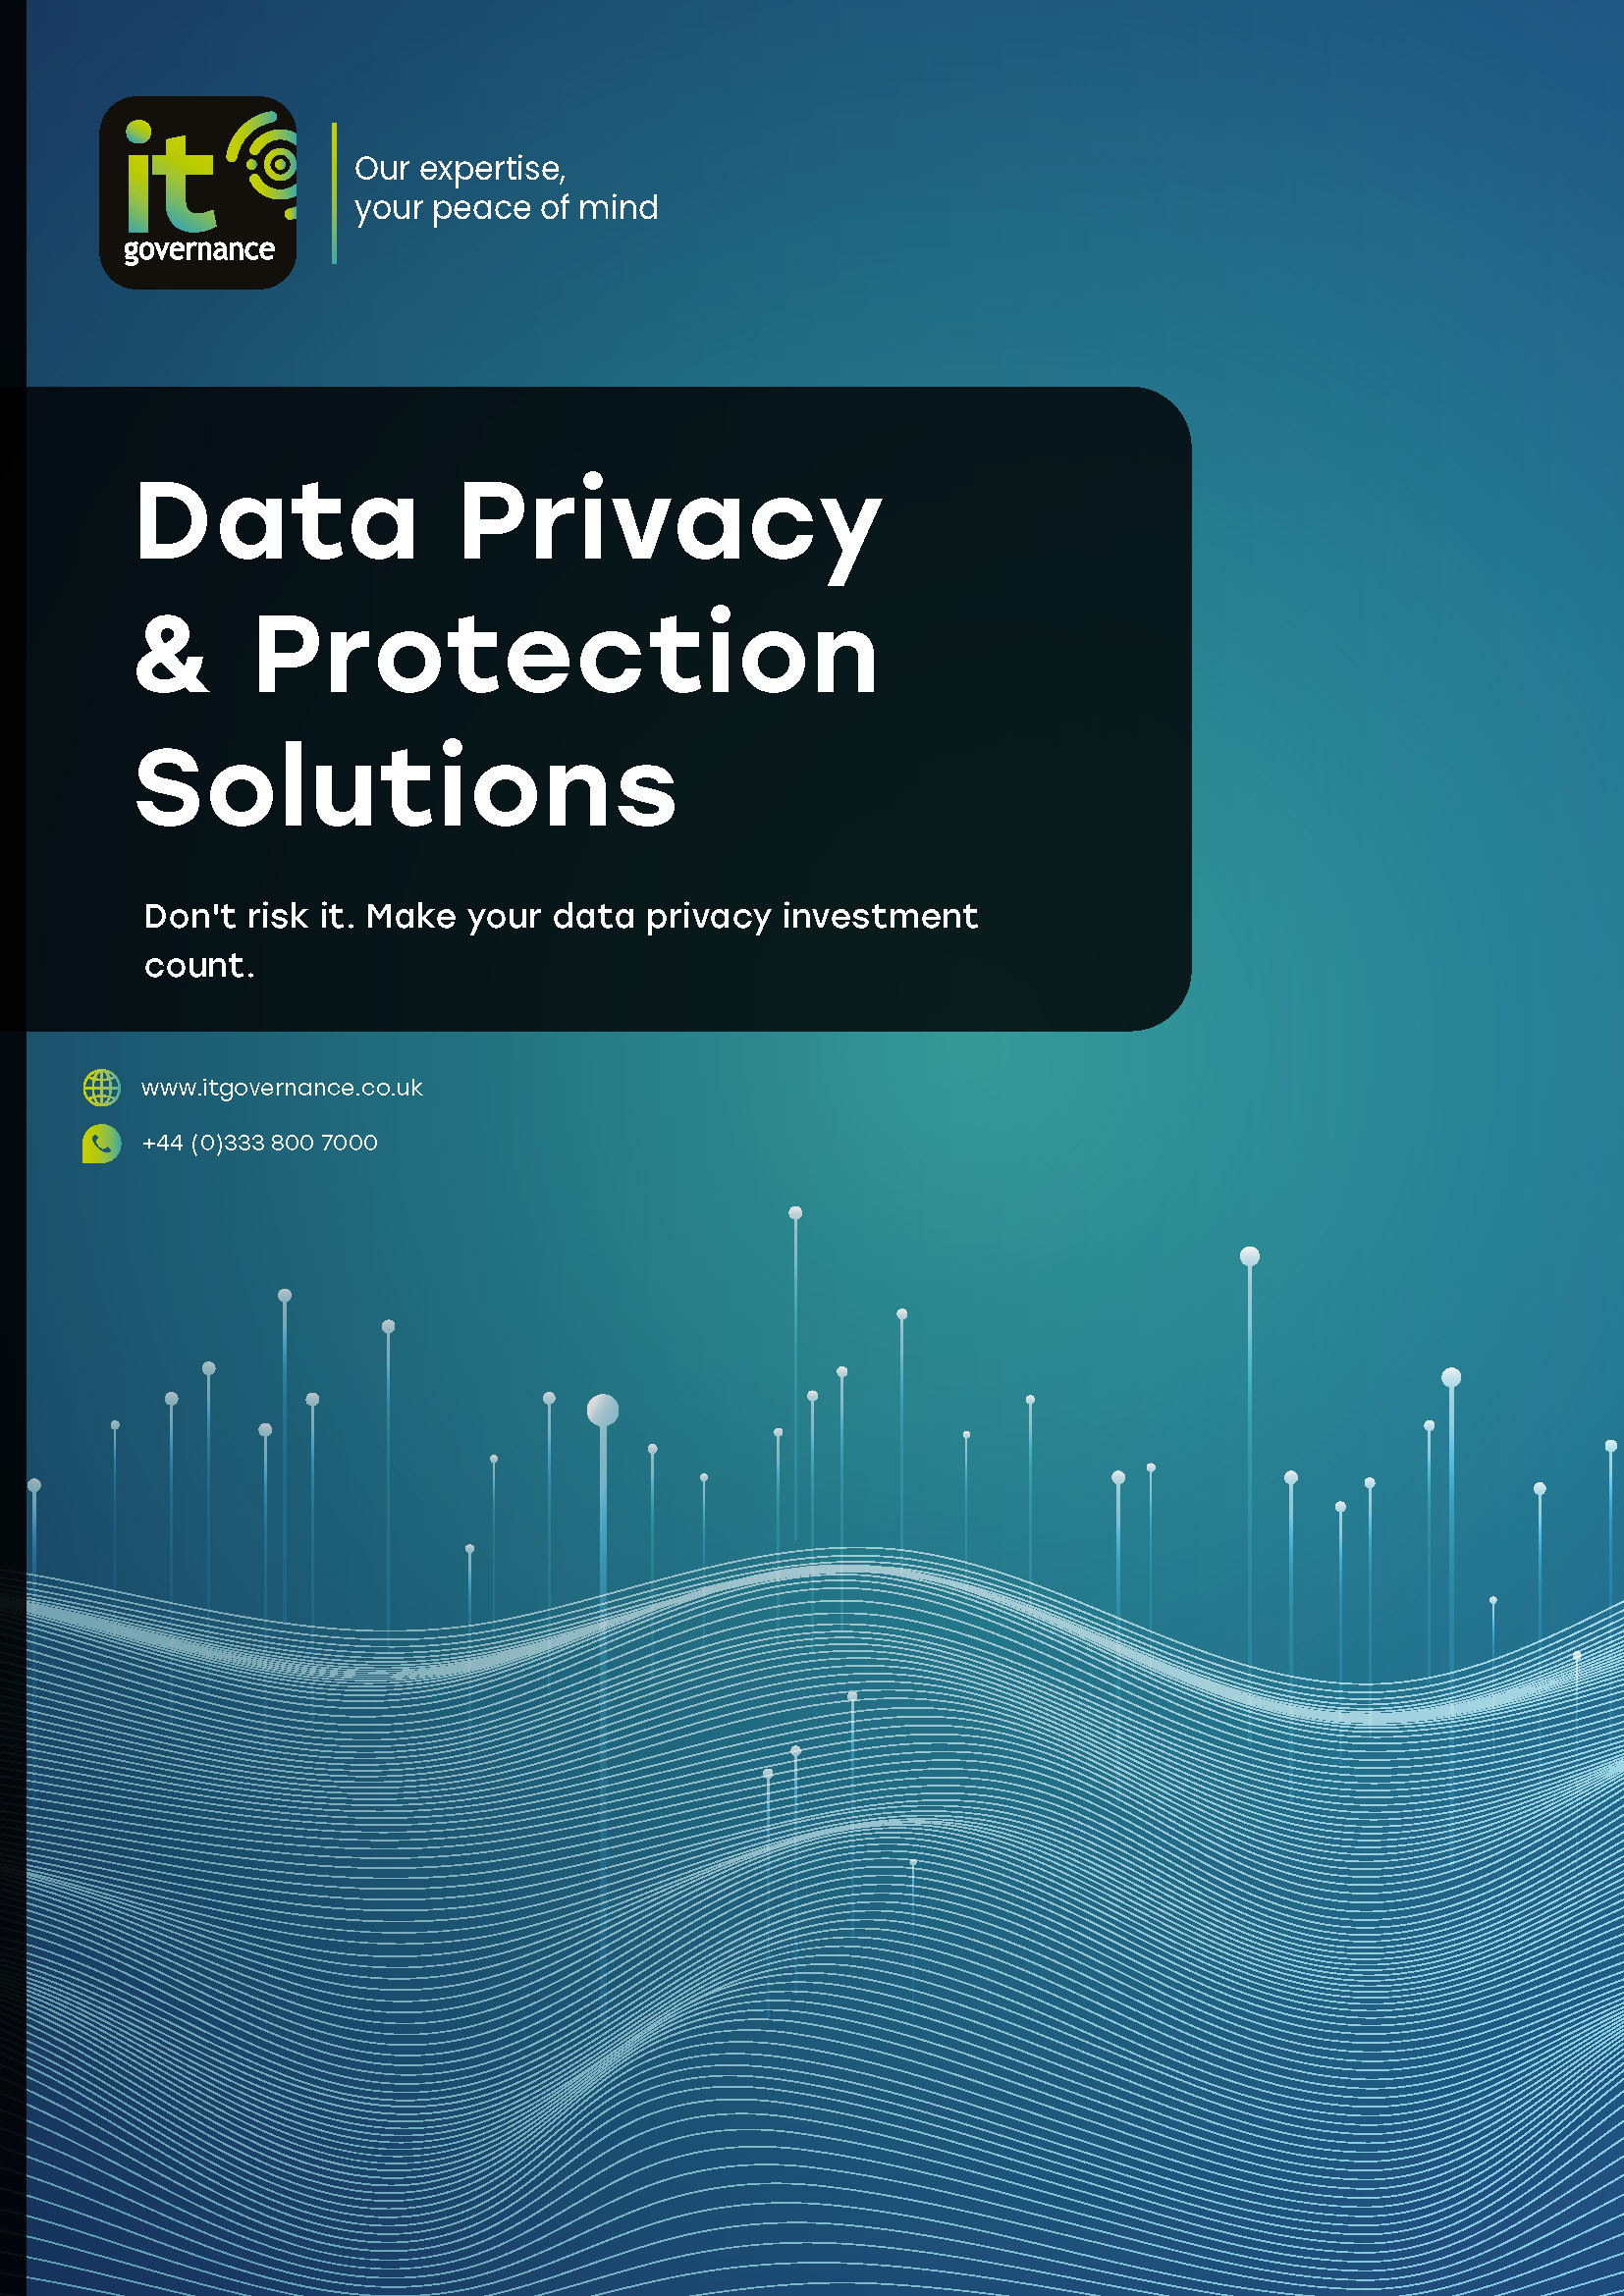 Data privacy and protection solutions